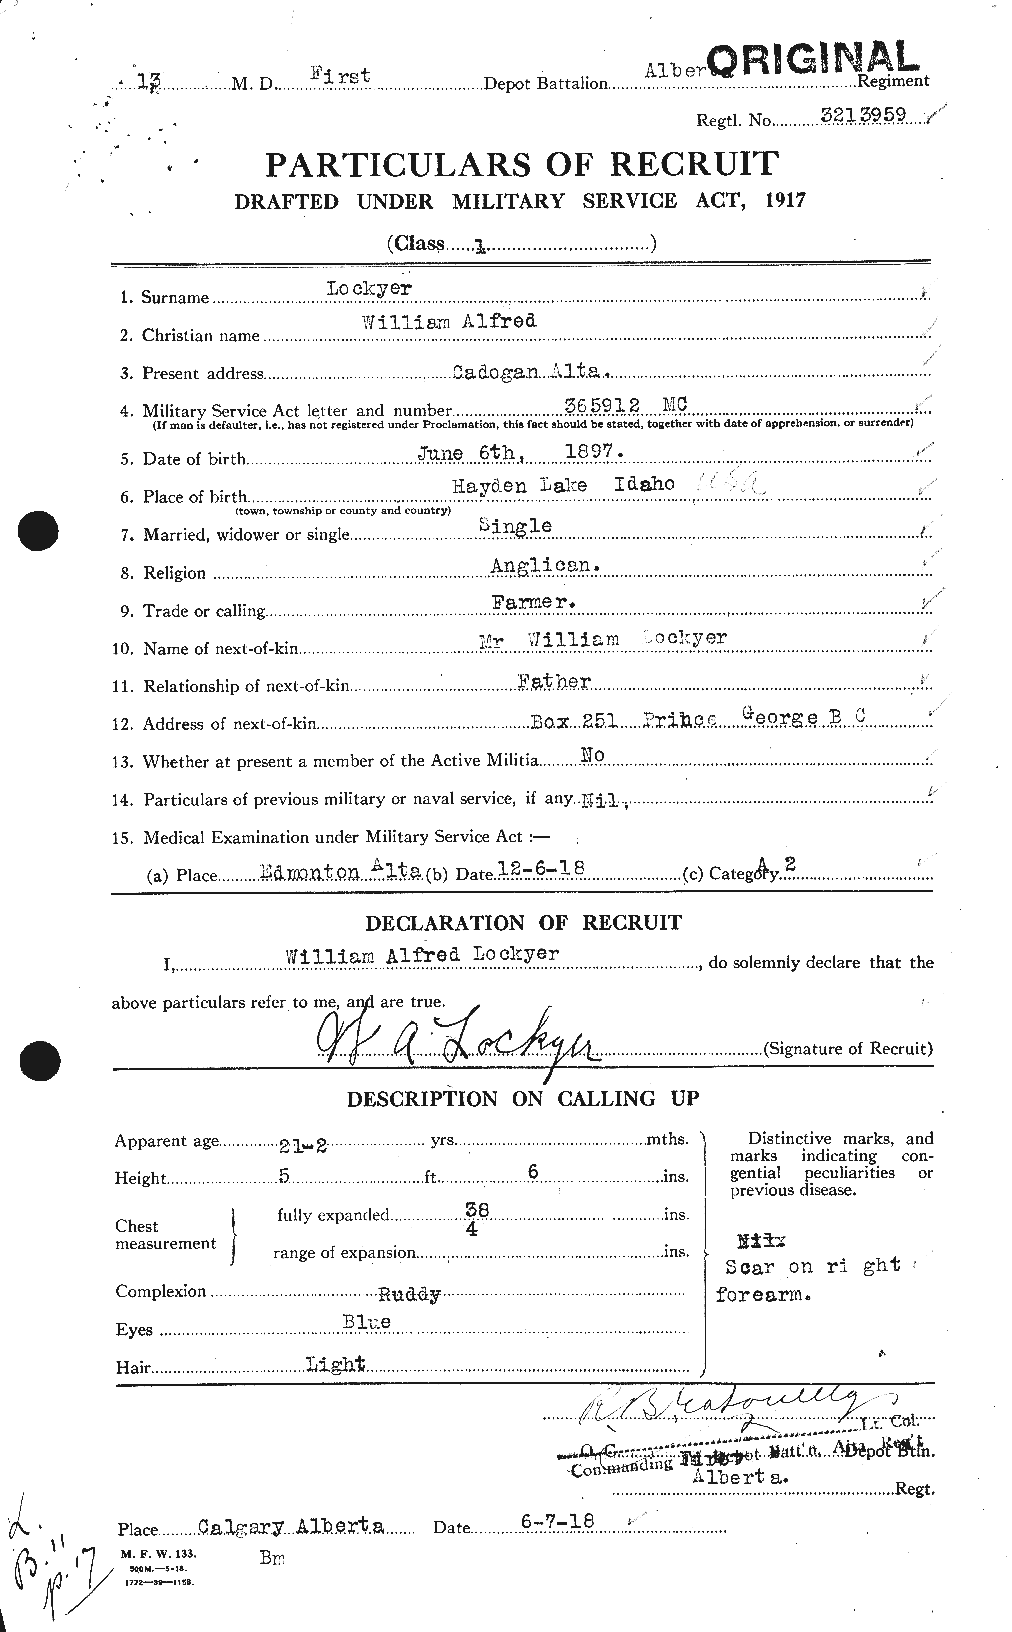 Personnel Records of the First World War - CEF 464770a